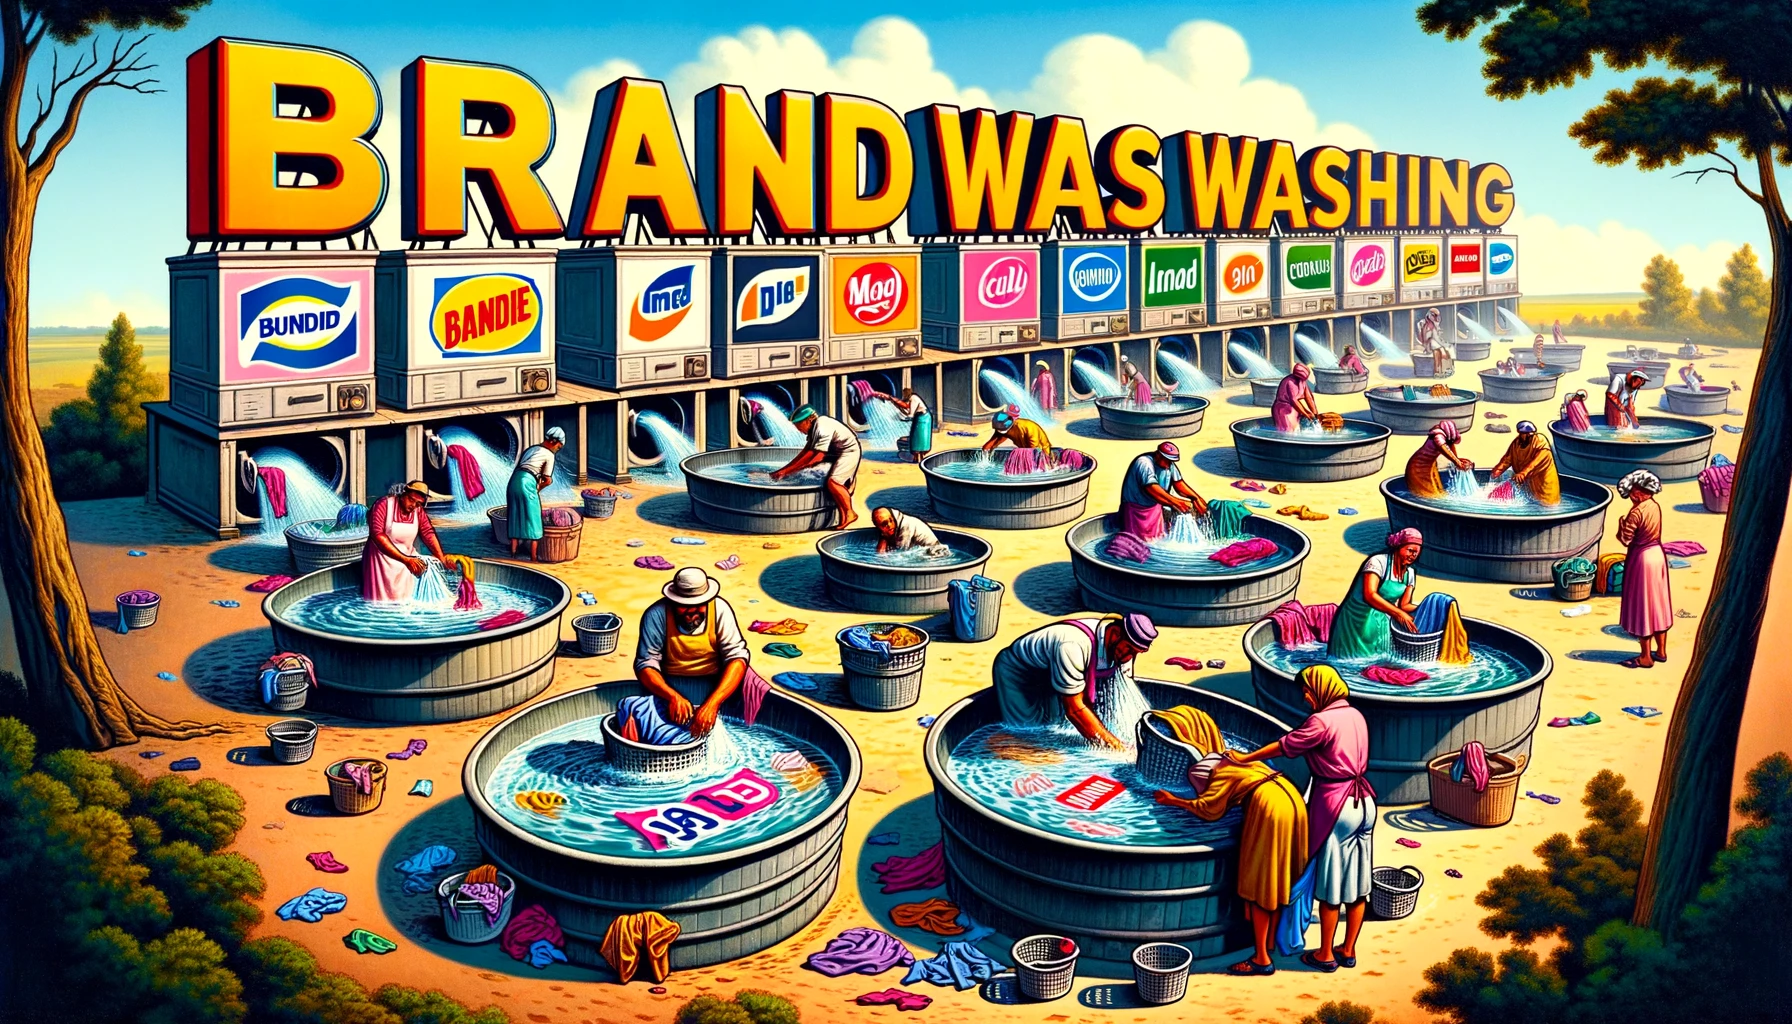 A wide, allegorical illustration of brandwashing using a clothes washing scene. The image shows a vibrant, outdoor setting with several large, old-fas